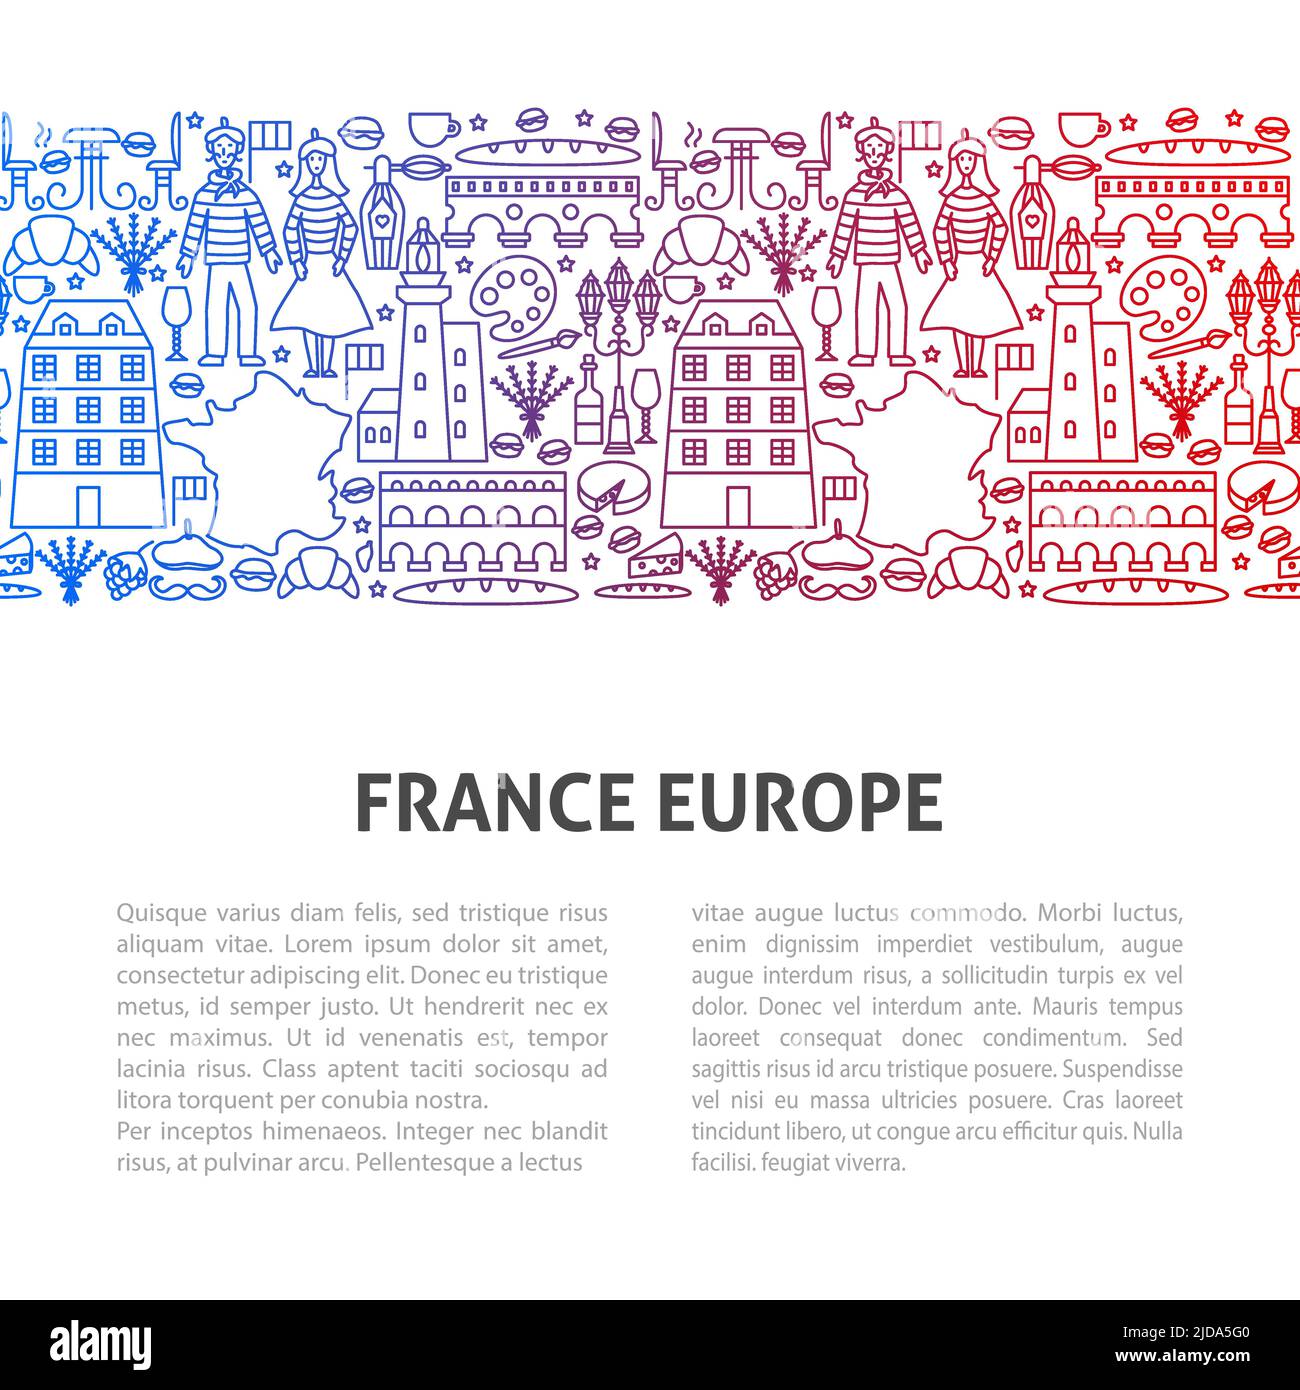 Europe France Line Template Stock Vector